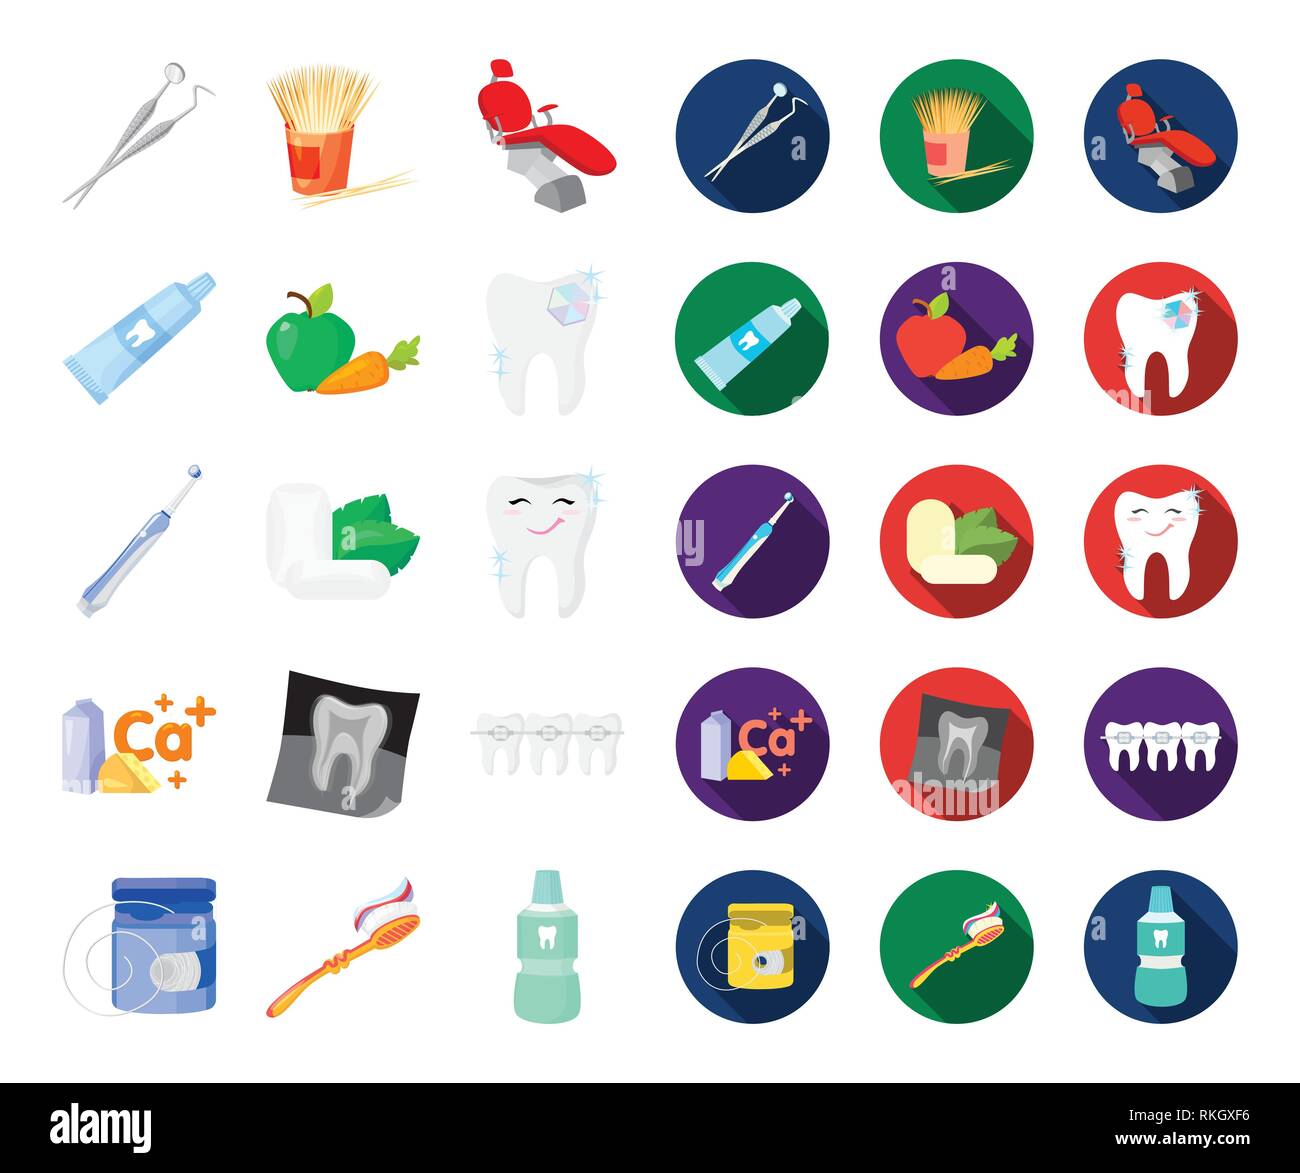 adaptation,apple,art,bottle,braces,calcium,care,carrot,cartoon,flat,chair,chewing,clinic,collection,dental,dentist,dentistry,design,diamond,doctor,electric,equipment,floss,gum,hygiene,icon,illustration,instrument,isolated,logo,medicine,mouthwash,ray,set,sign,smile,smiling,sources,symbol,teeth,tooth,toothbrush,toothpaste,toothpick,treatment,vector,web,white,x Vector Vectors , Stock Vector